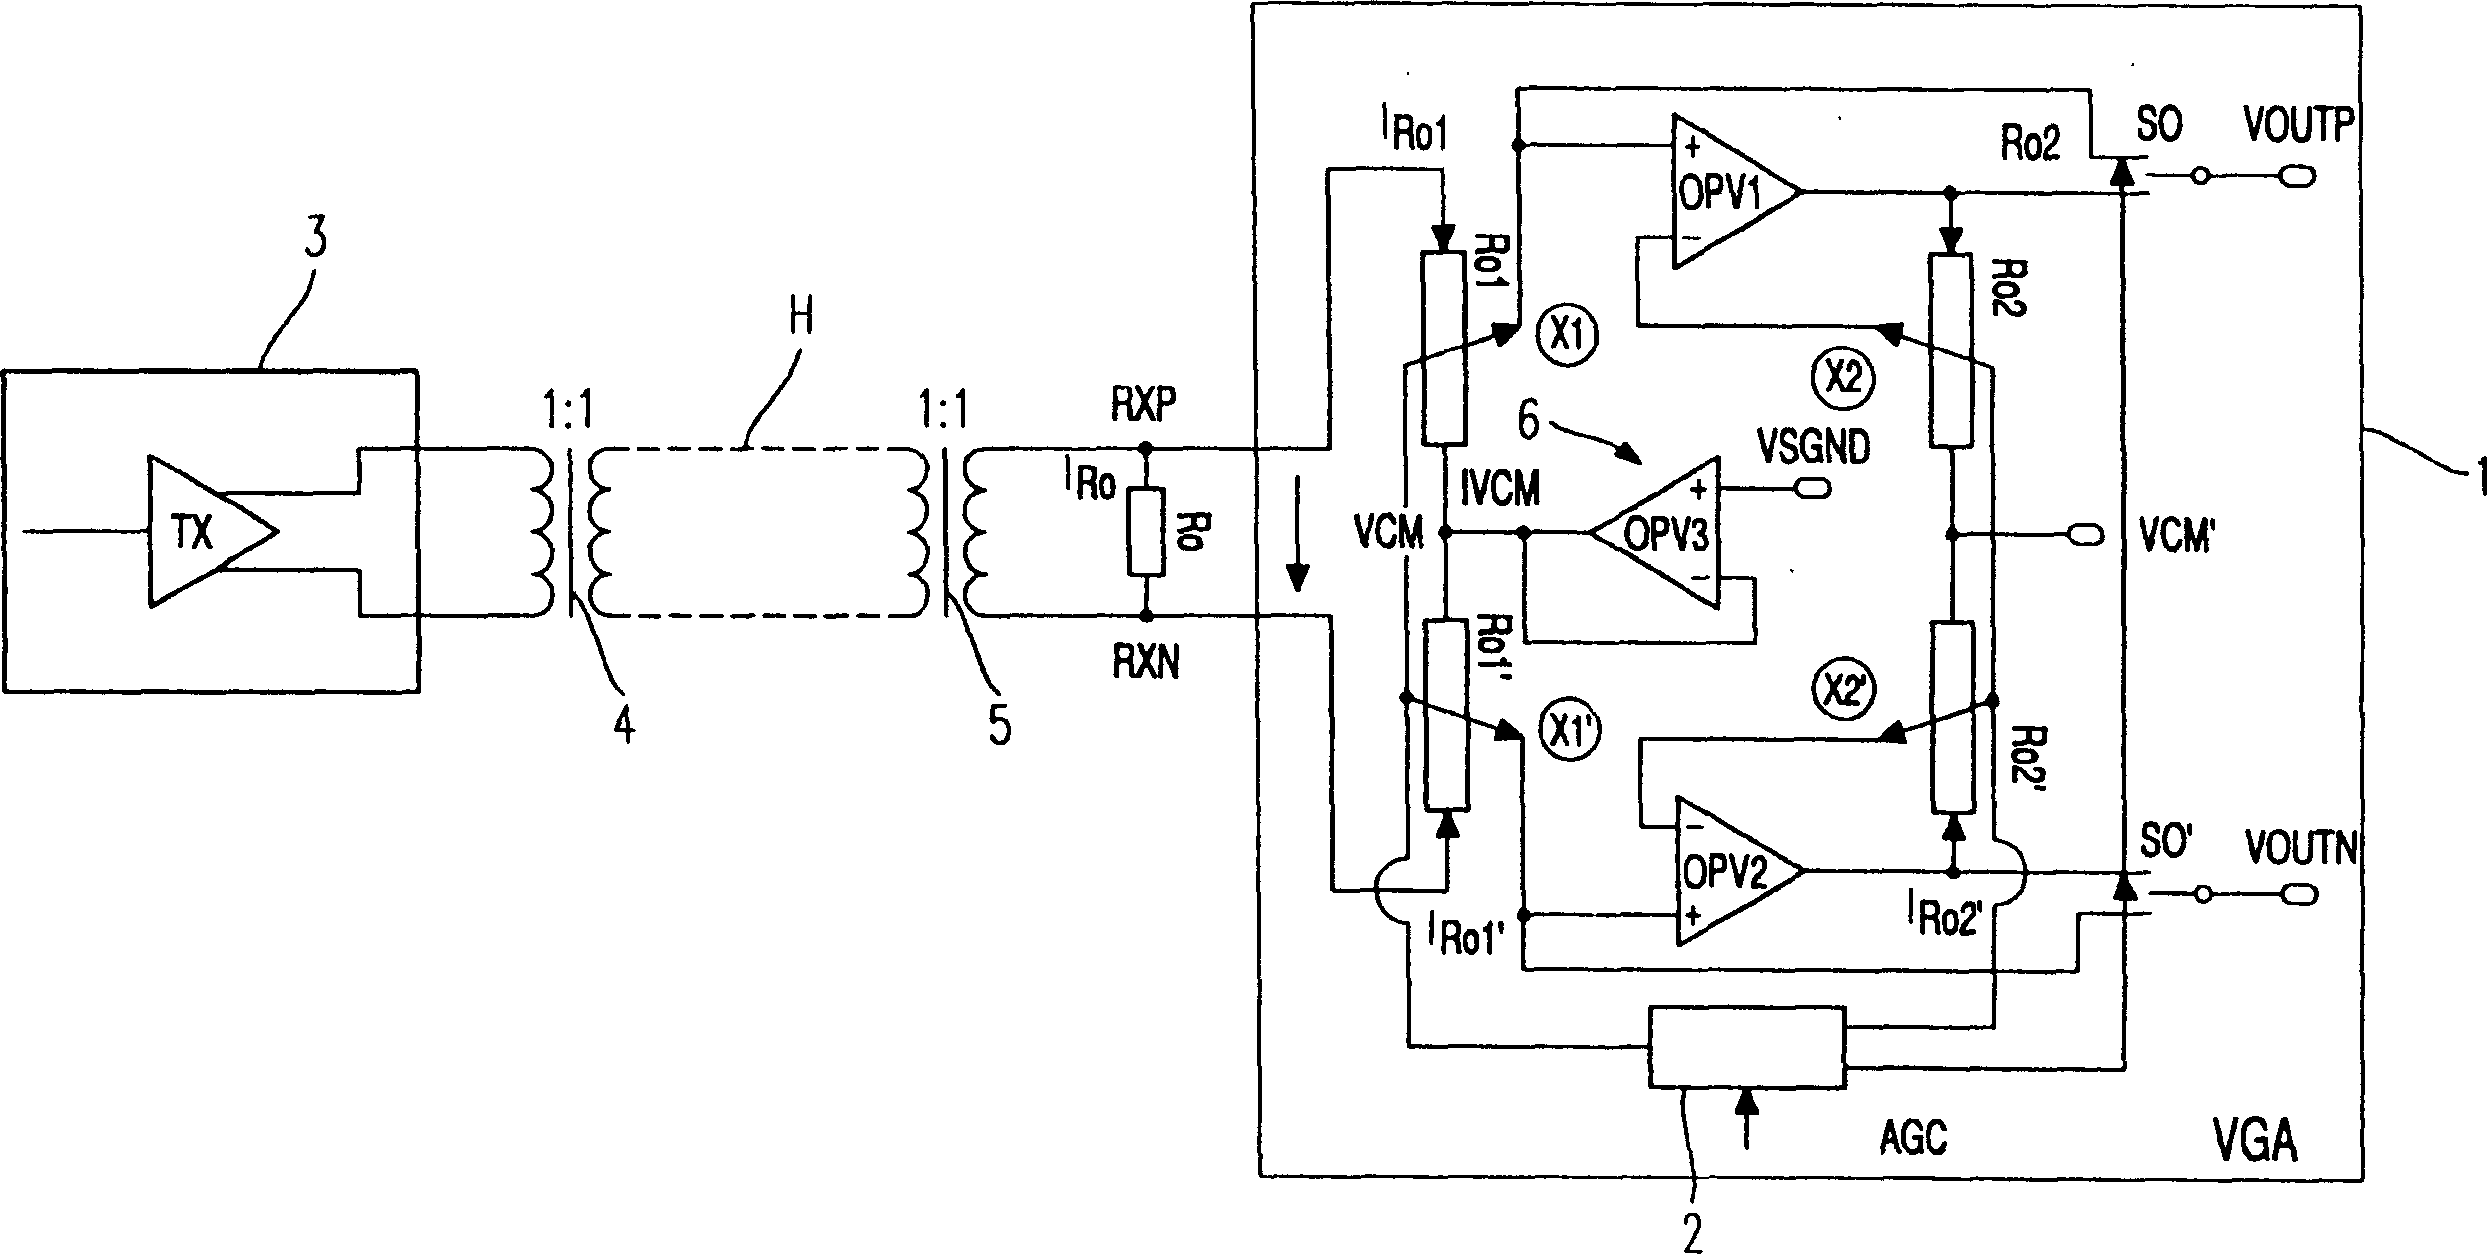 Db-linear variable gain amplifier (vga) stage with a high broad band